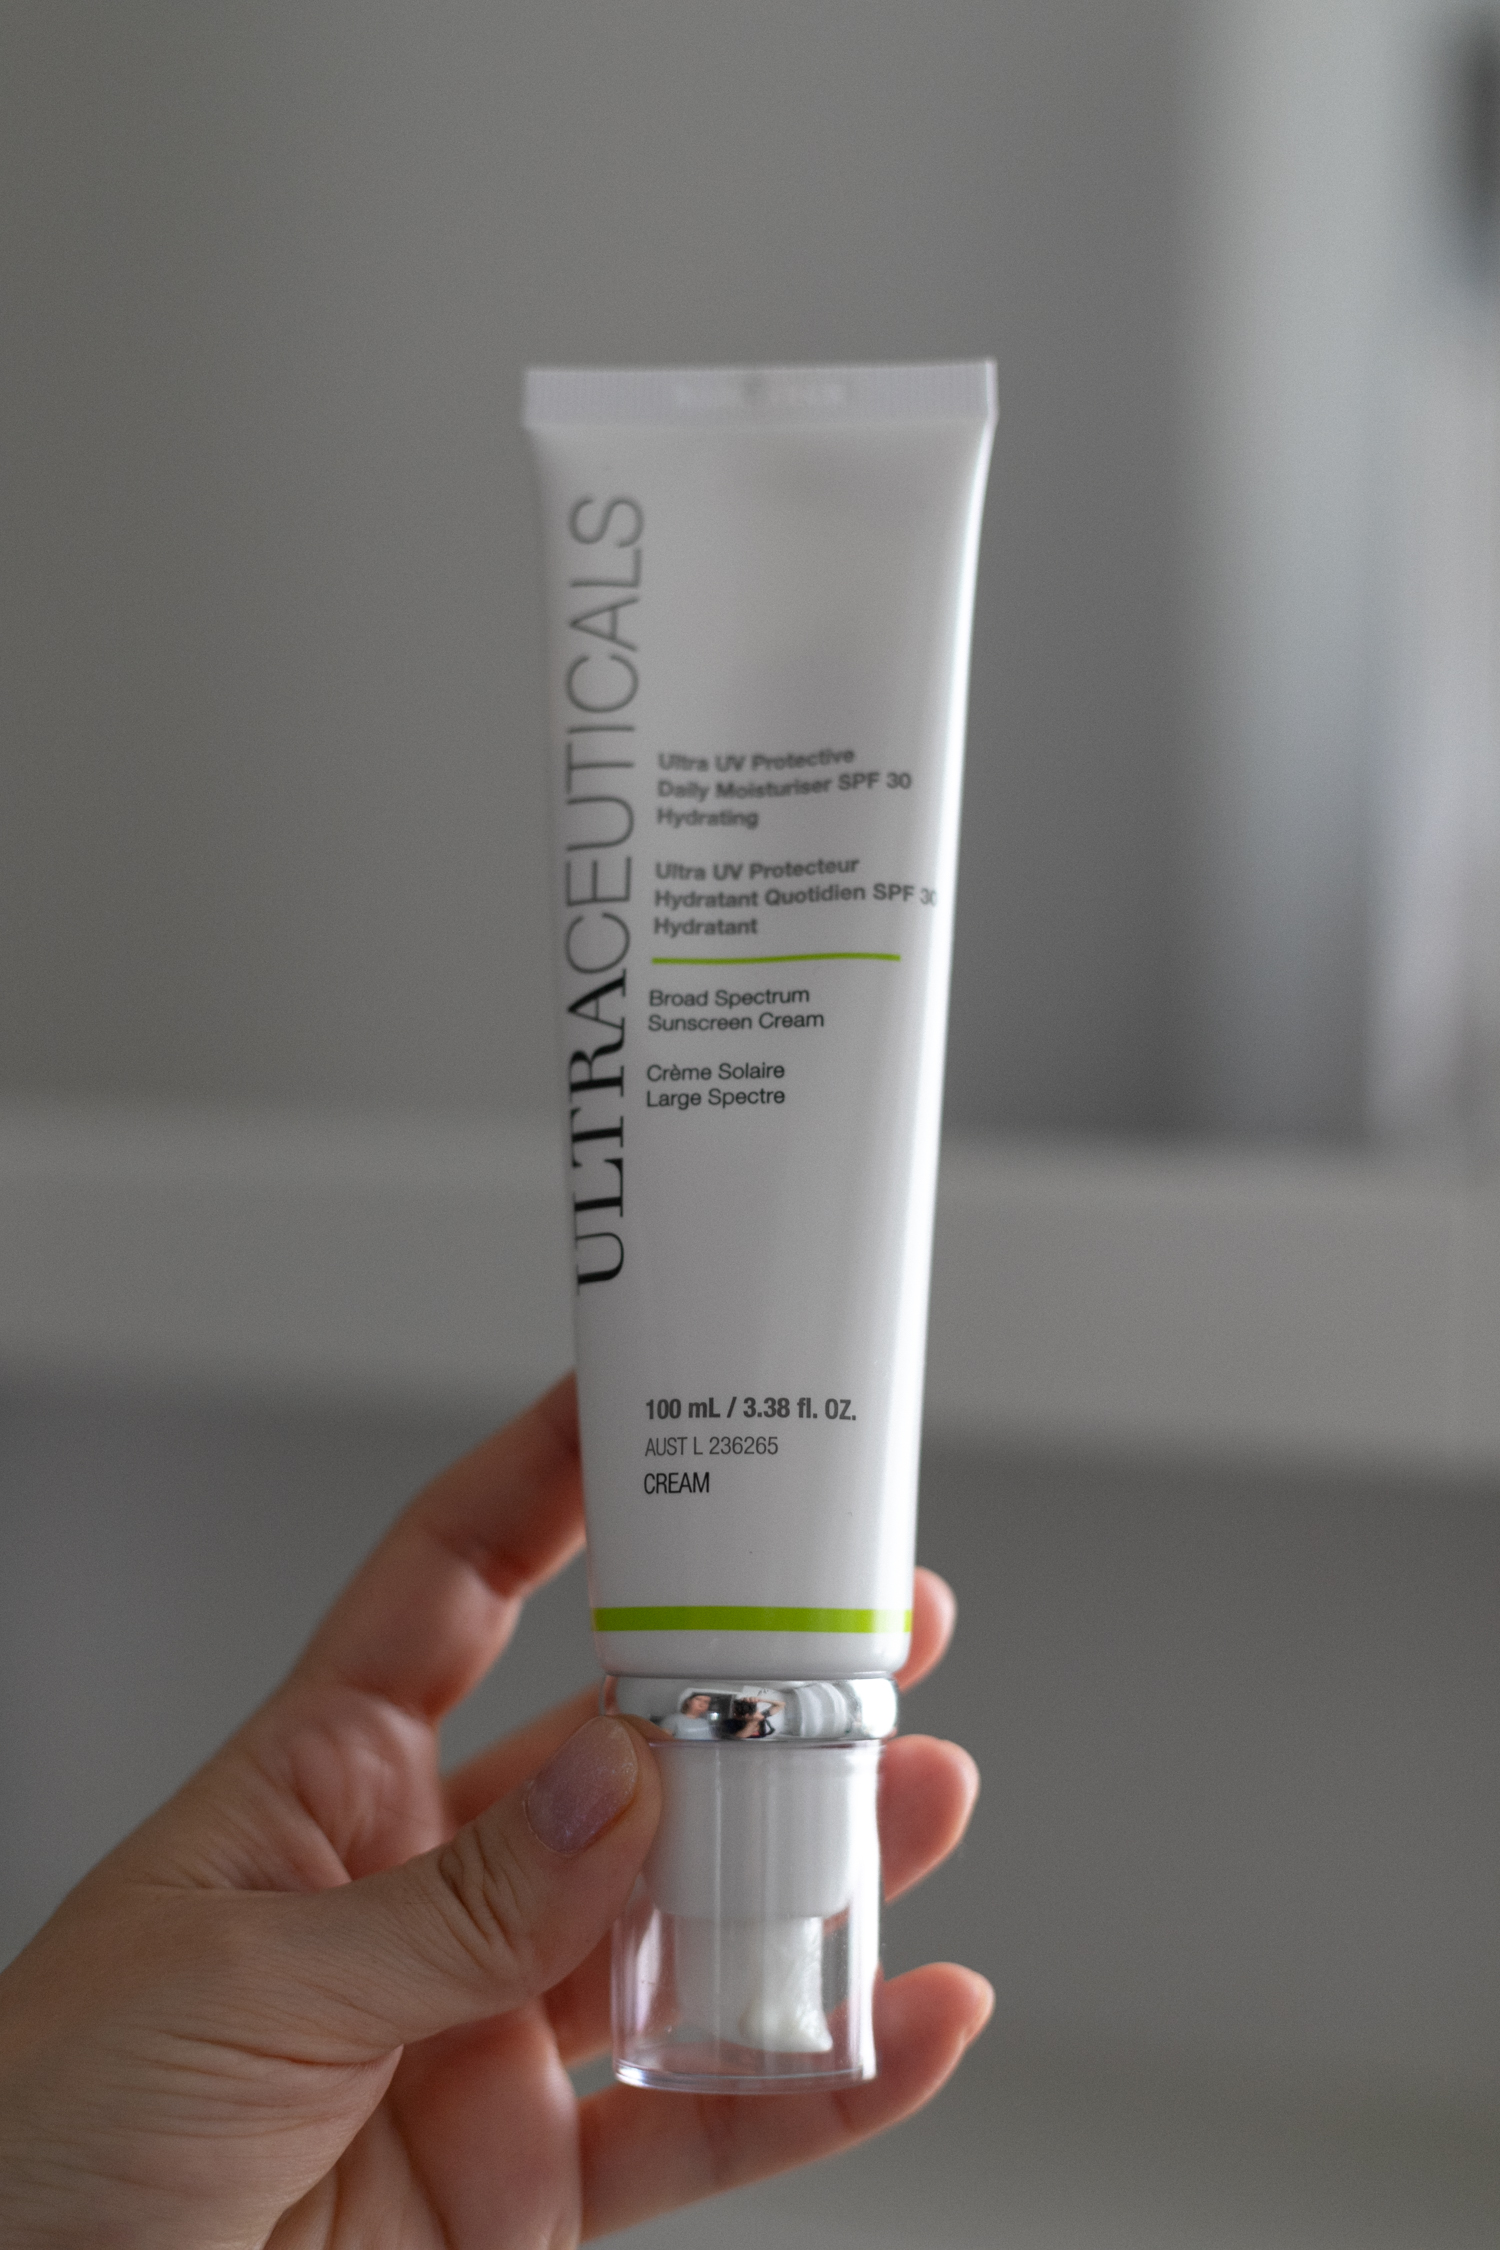 Ultraceuticals Ultra UV Protective Daily Moisture. The moisturizer provides hydration and sun protection for the skin.